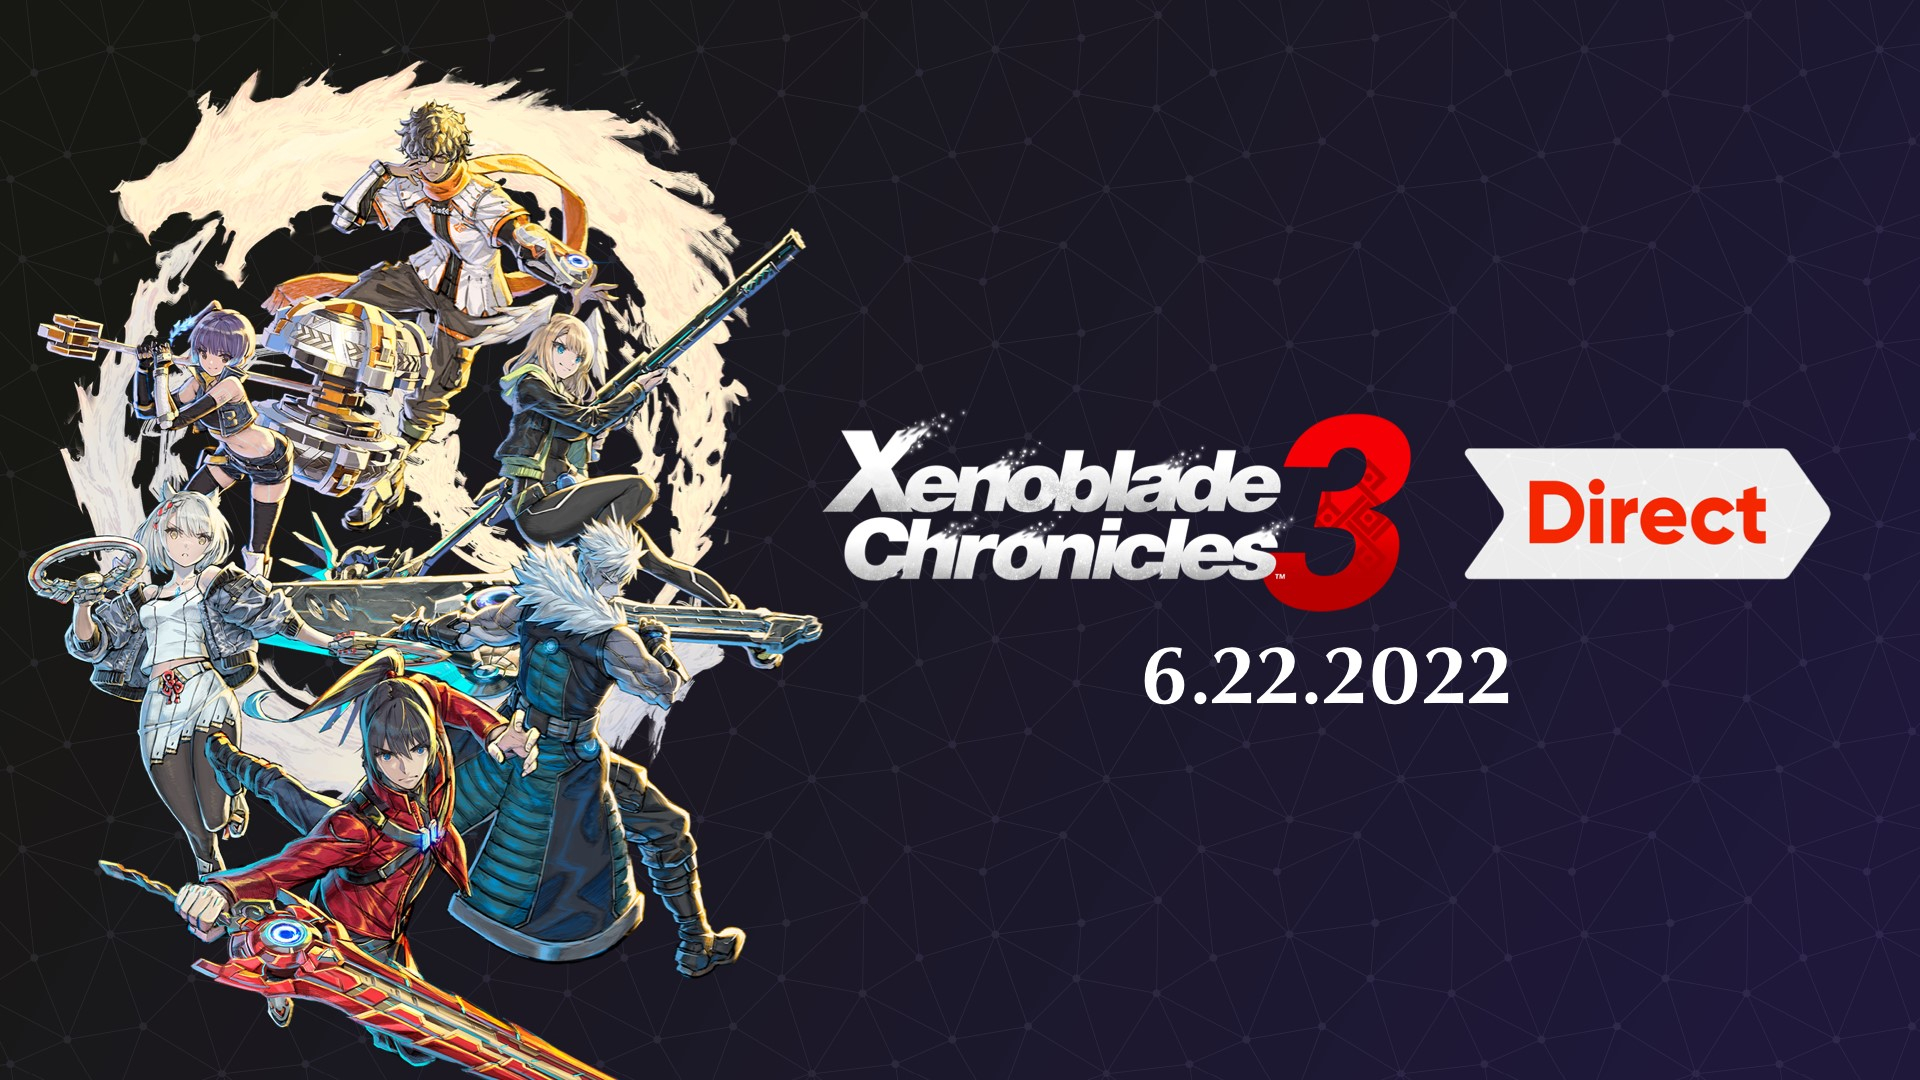 Unveils | Details Direct Packed Chronicles and Wire Business Nintendo Presentation Footage Xenoblade With New 3